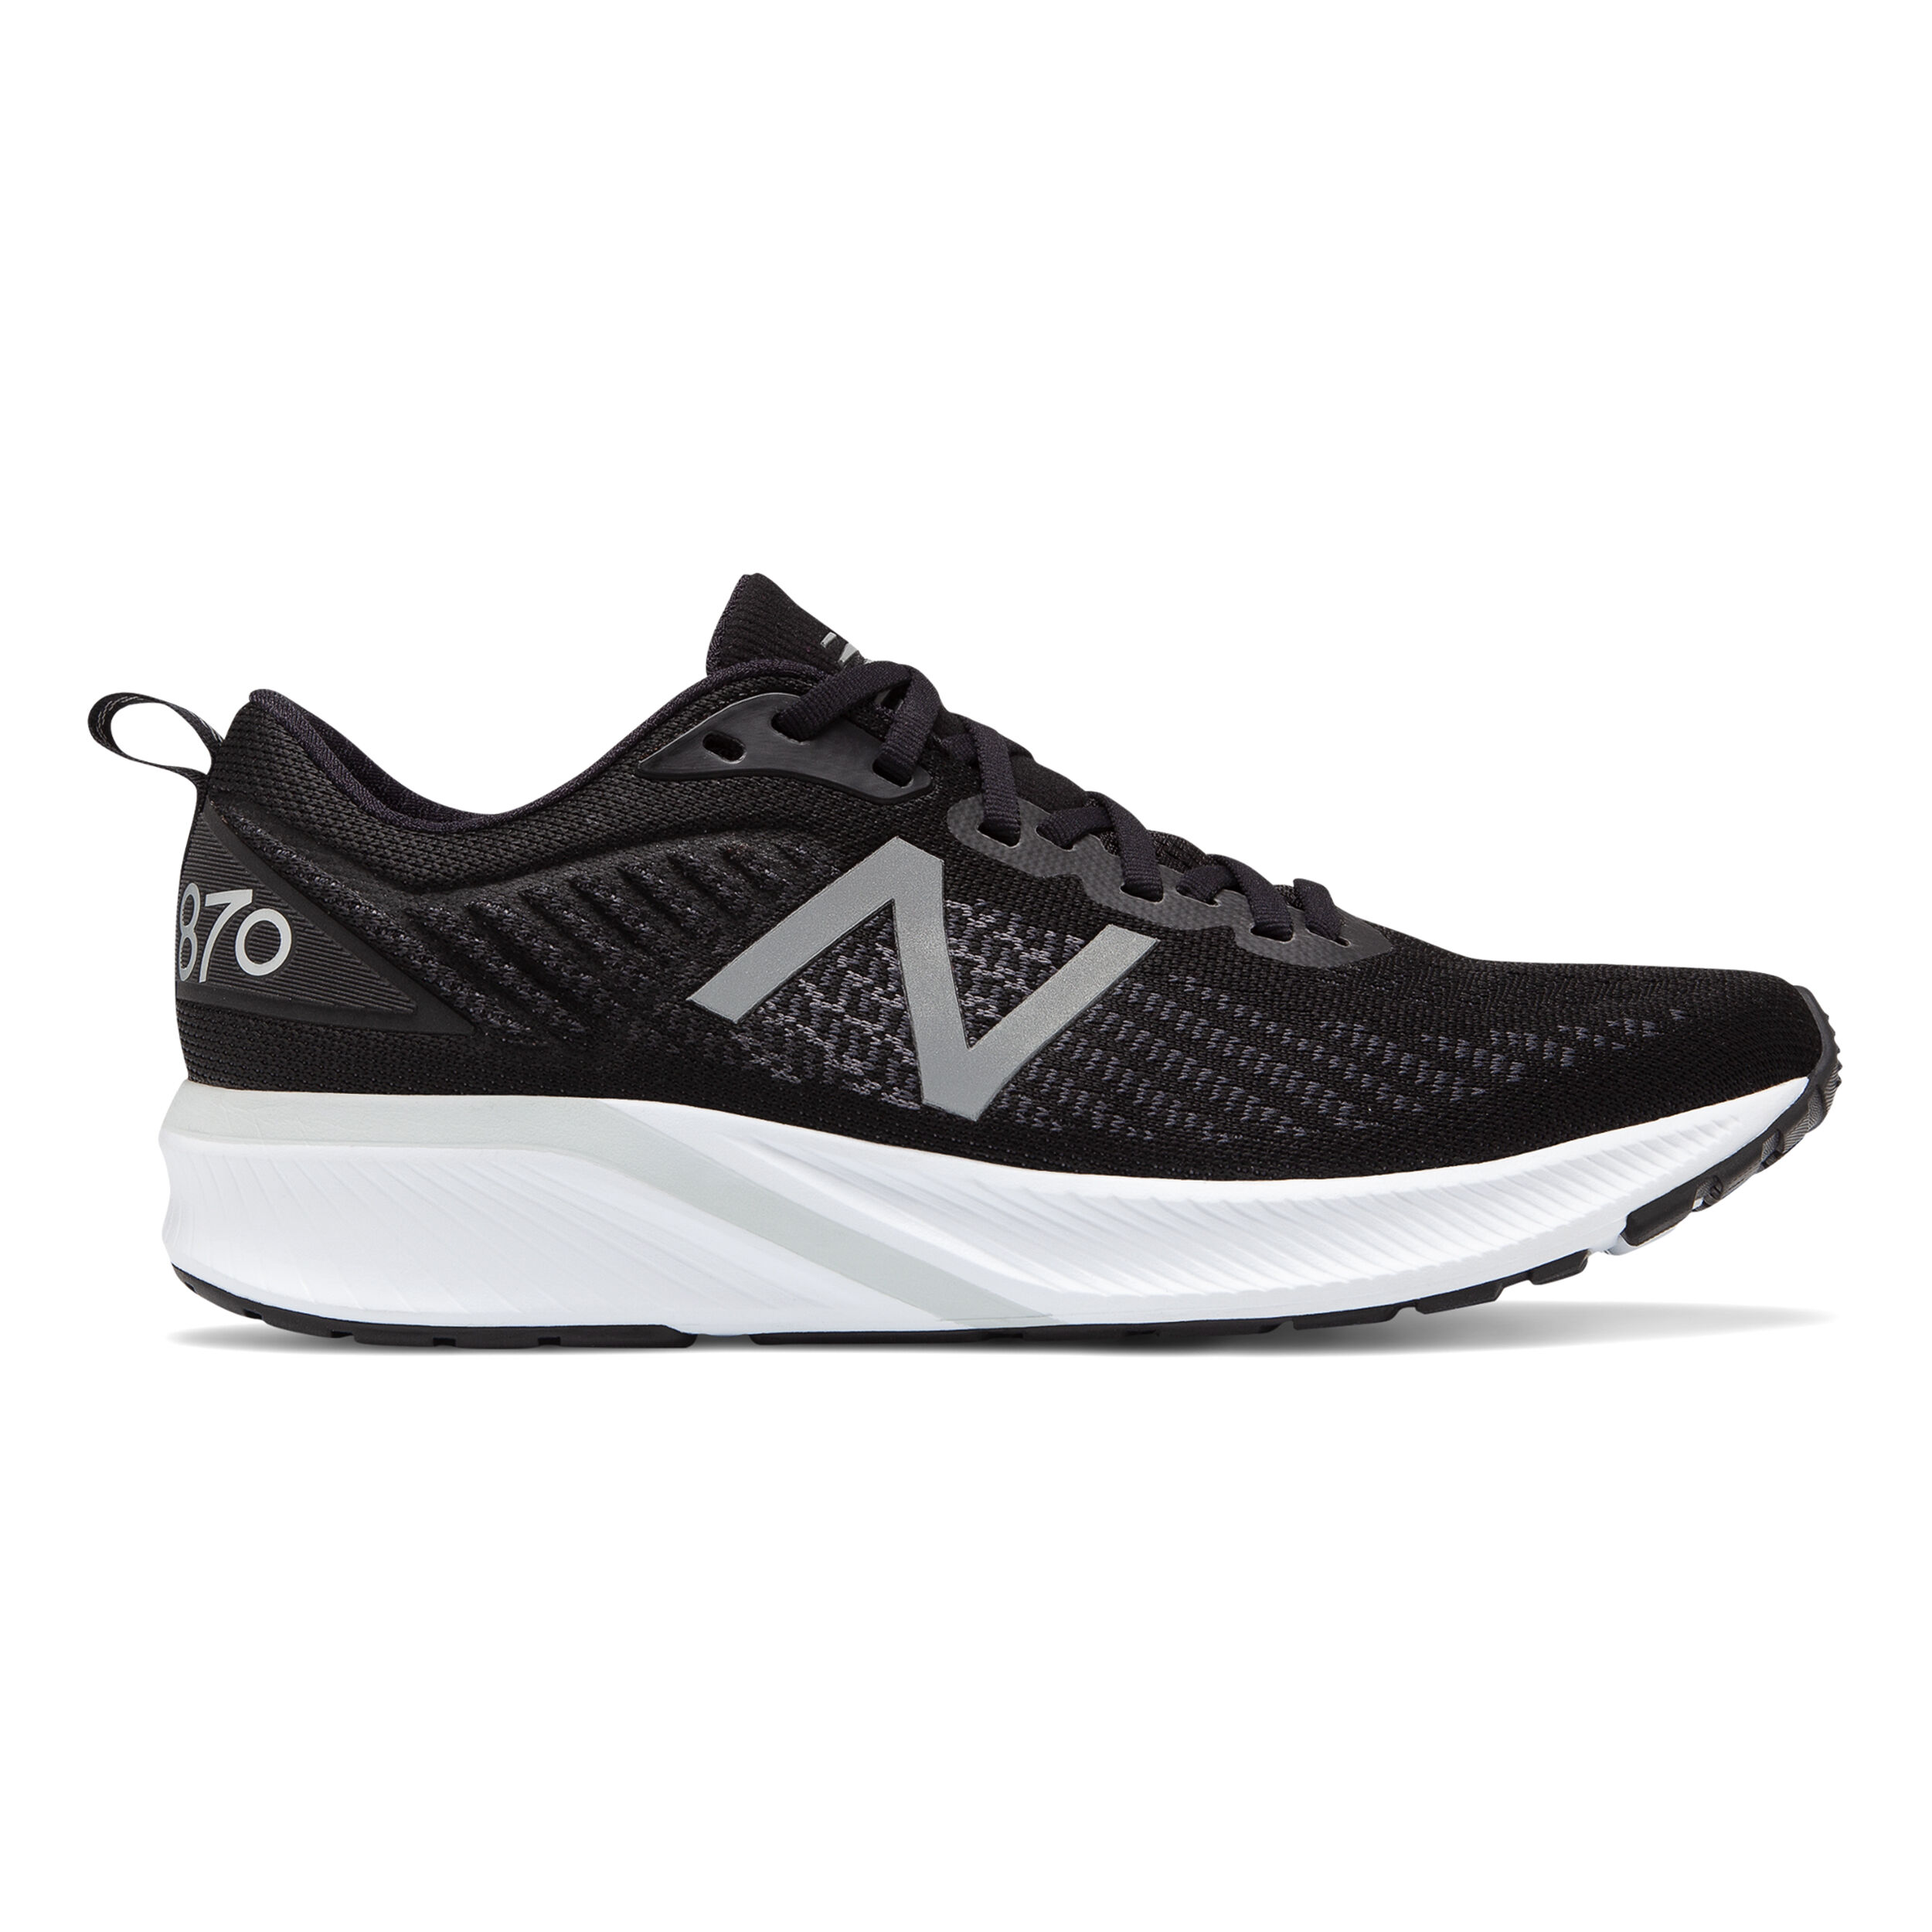 Buy Running shoes from New Balance 